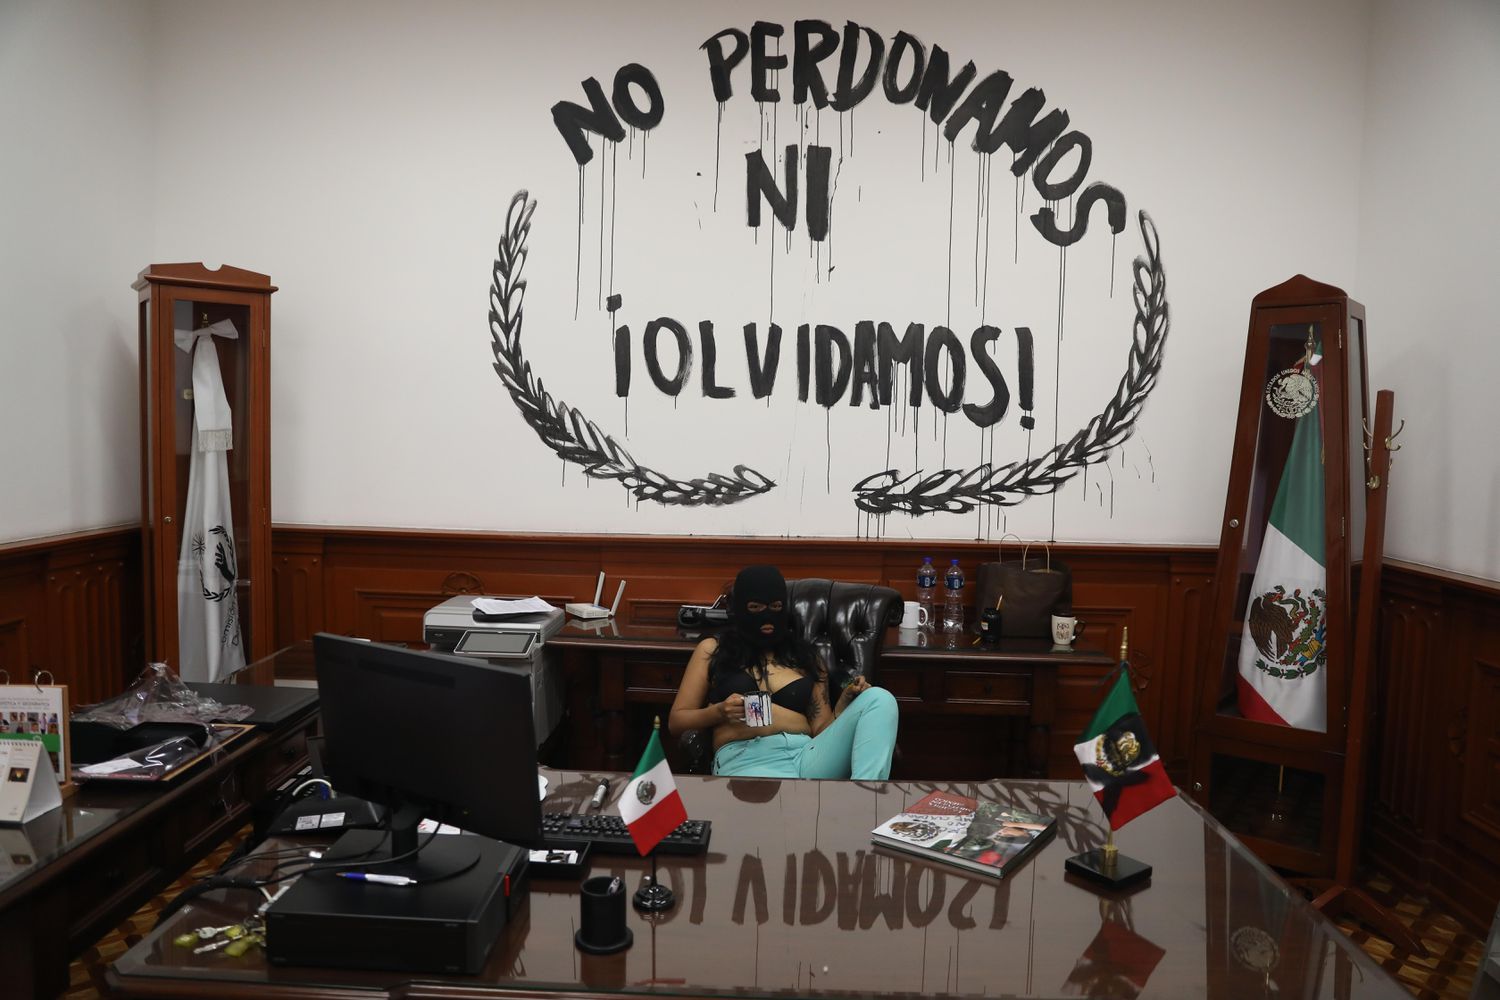 An activist inside the feminist occupied CNDH headquarters against the backdrop of spray painted words that read, “we do not forgive or forget.” Photo: El País.